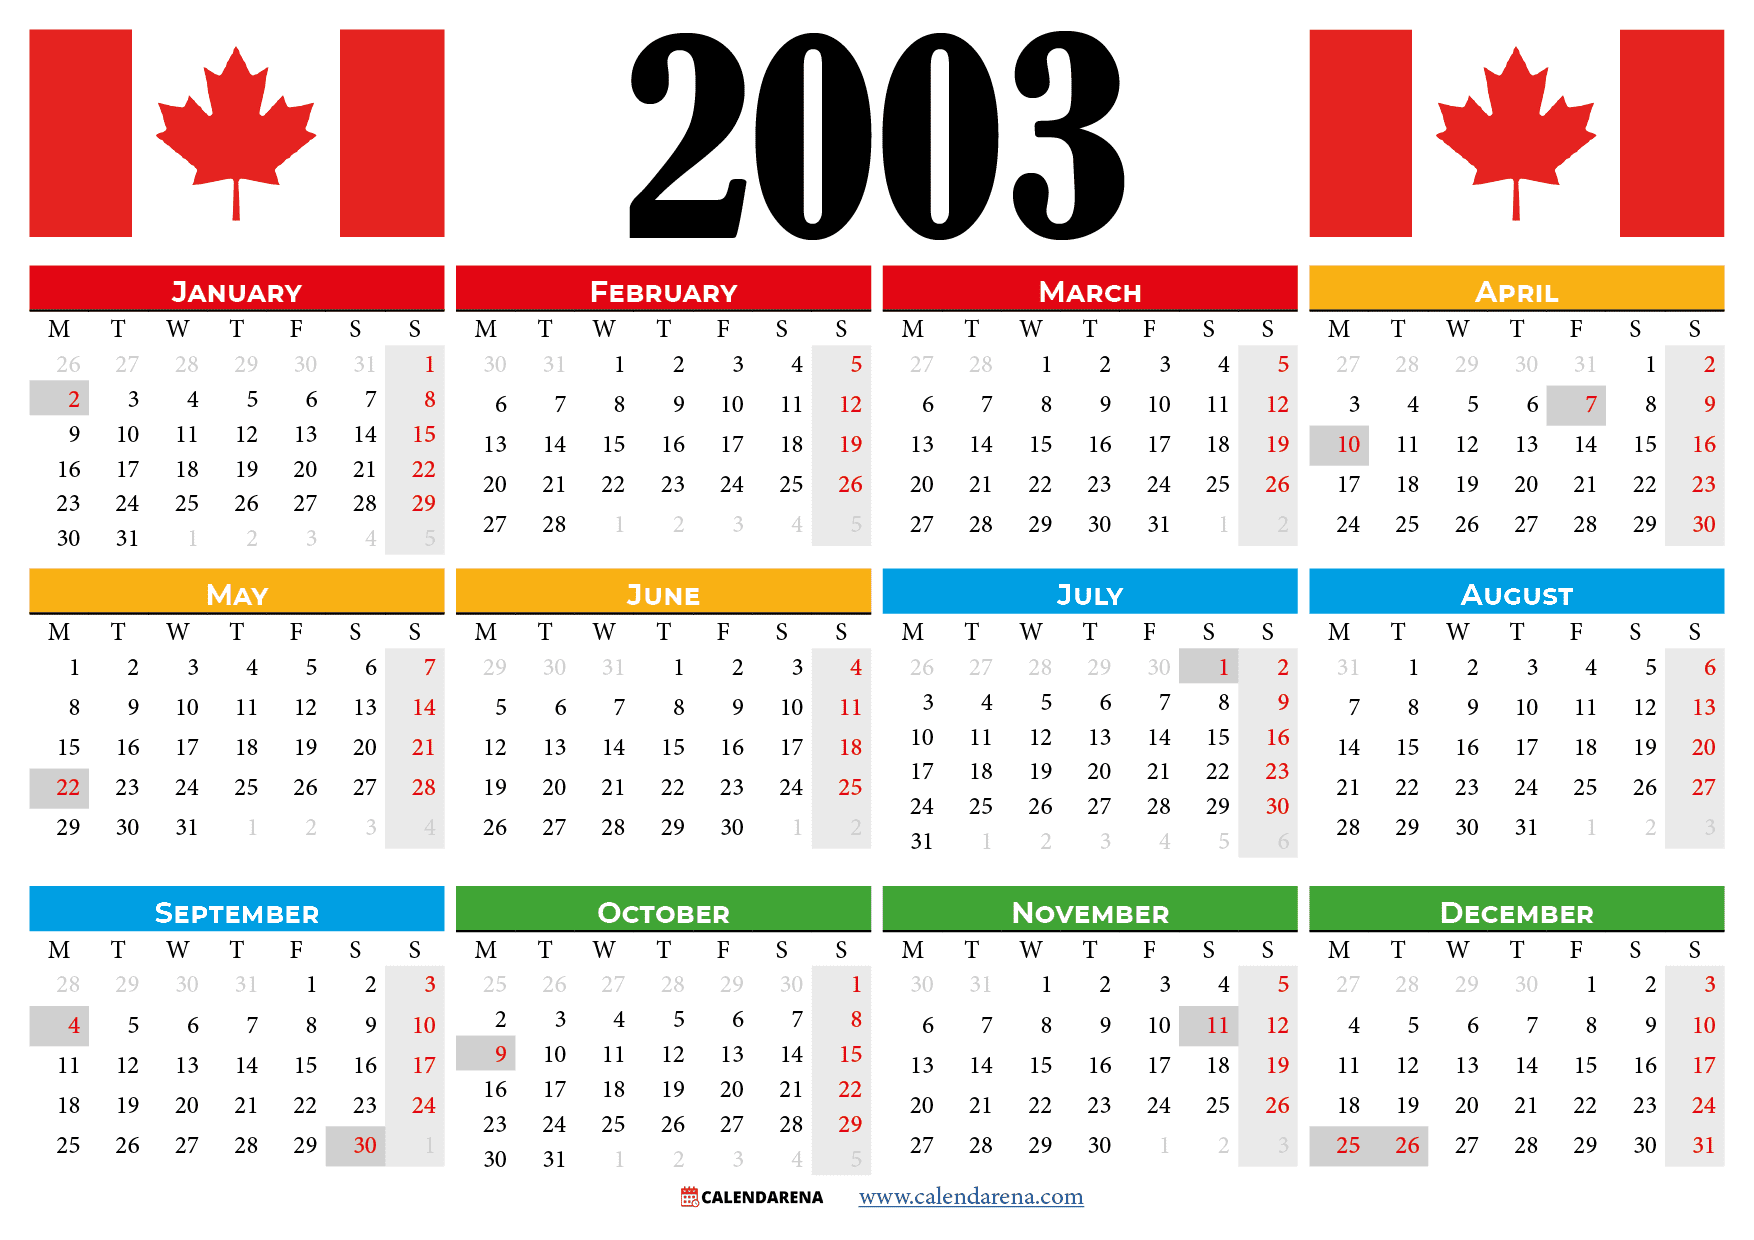 Free Printable 2024 Monthly Calendar With Holidays Canada Printable